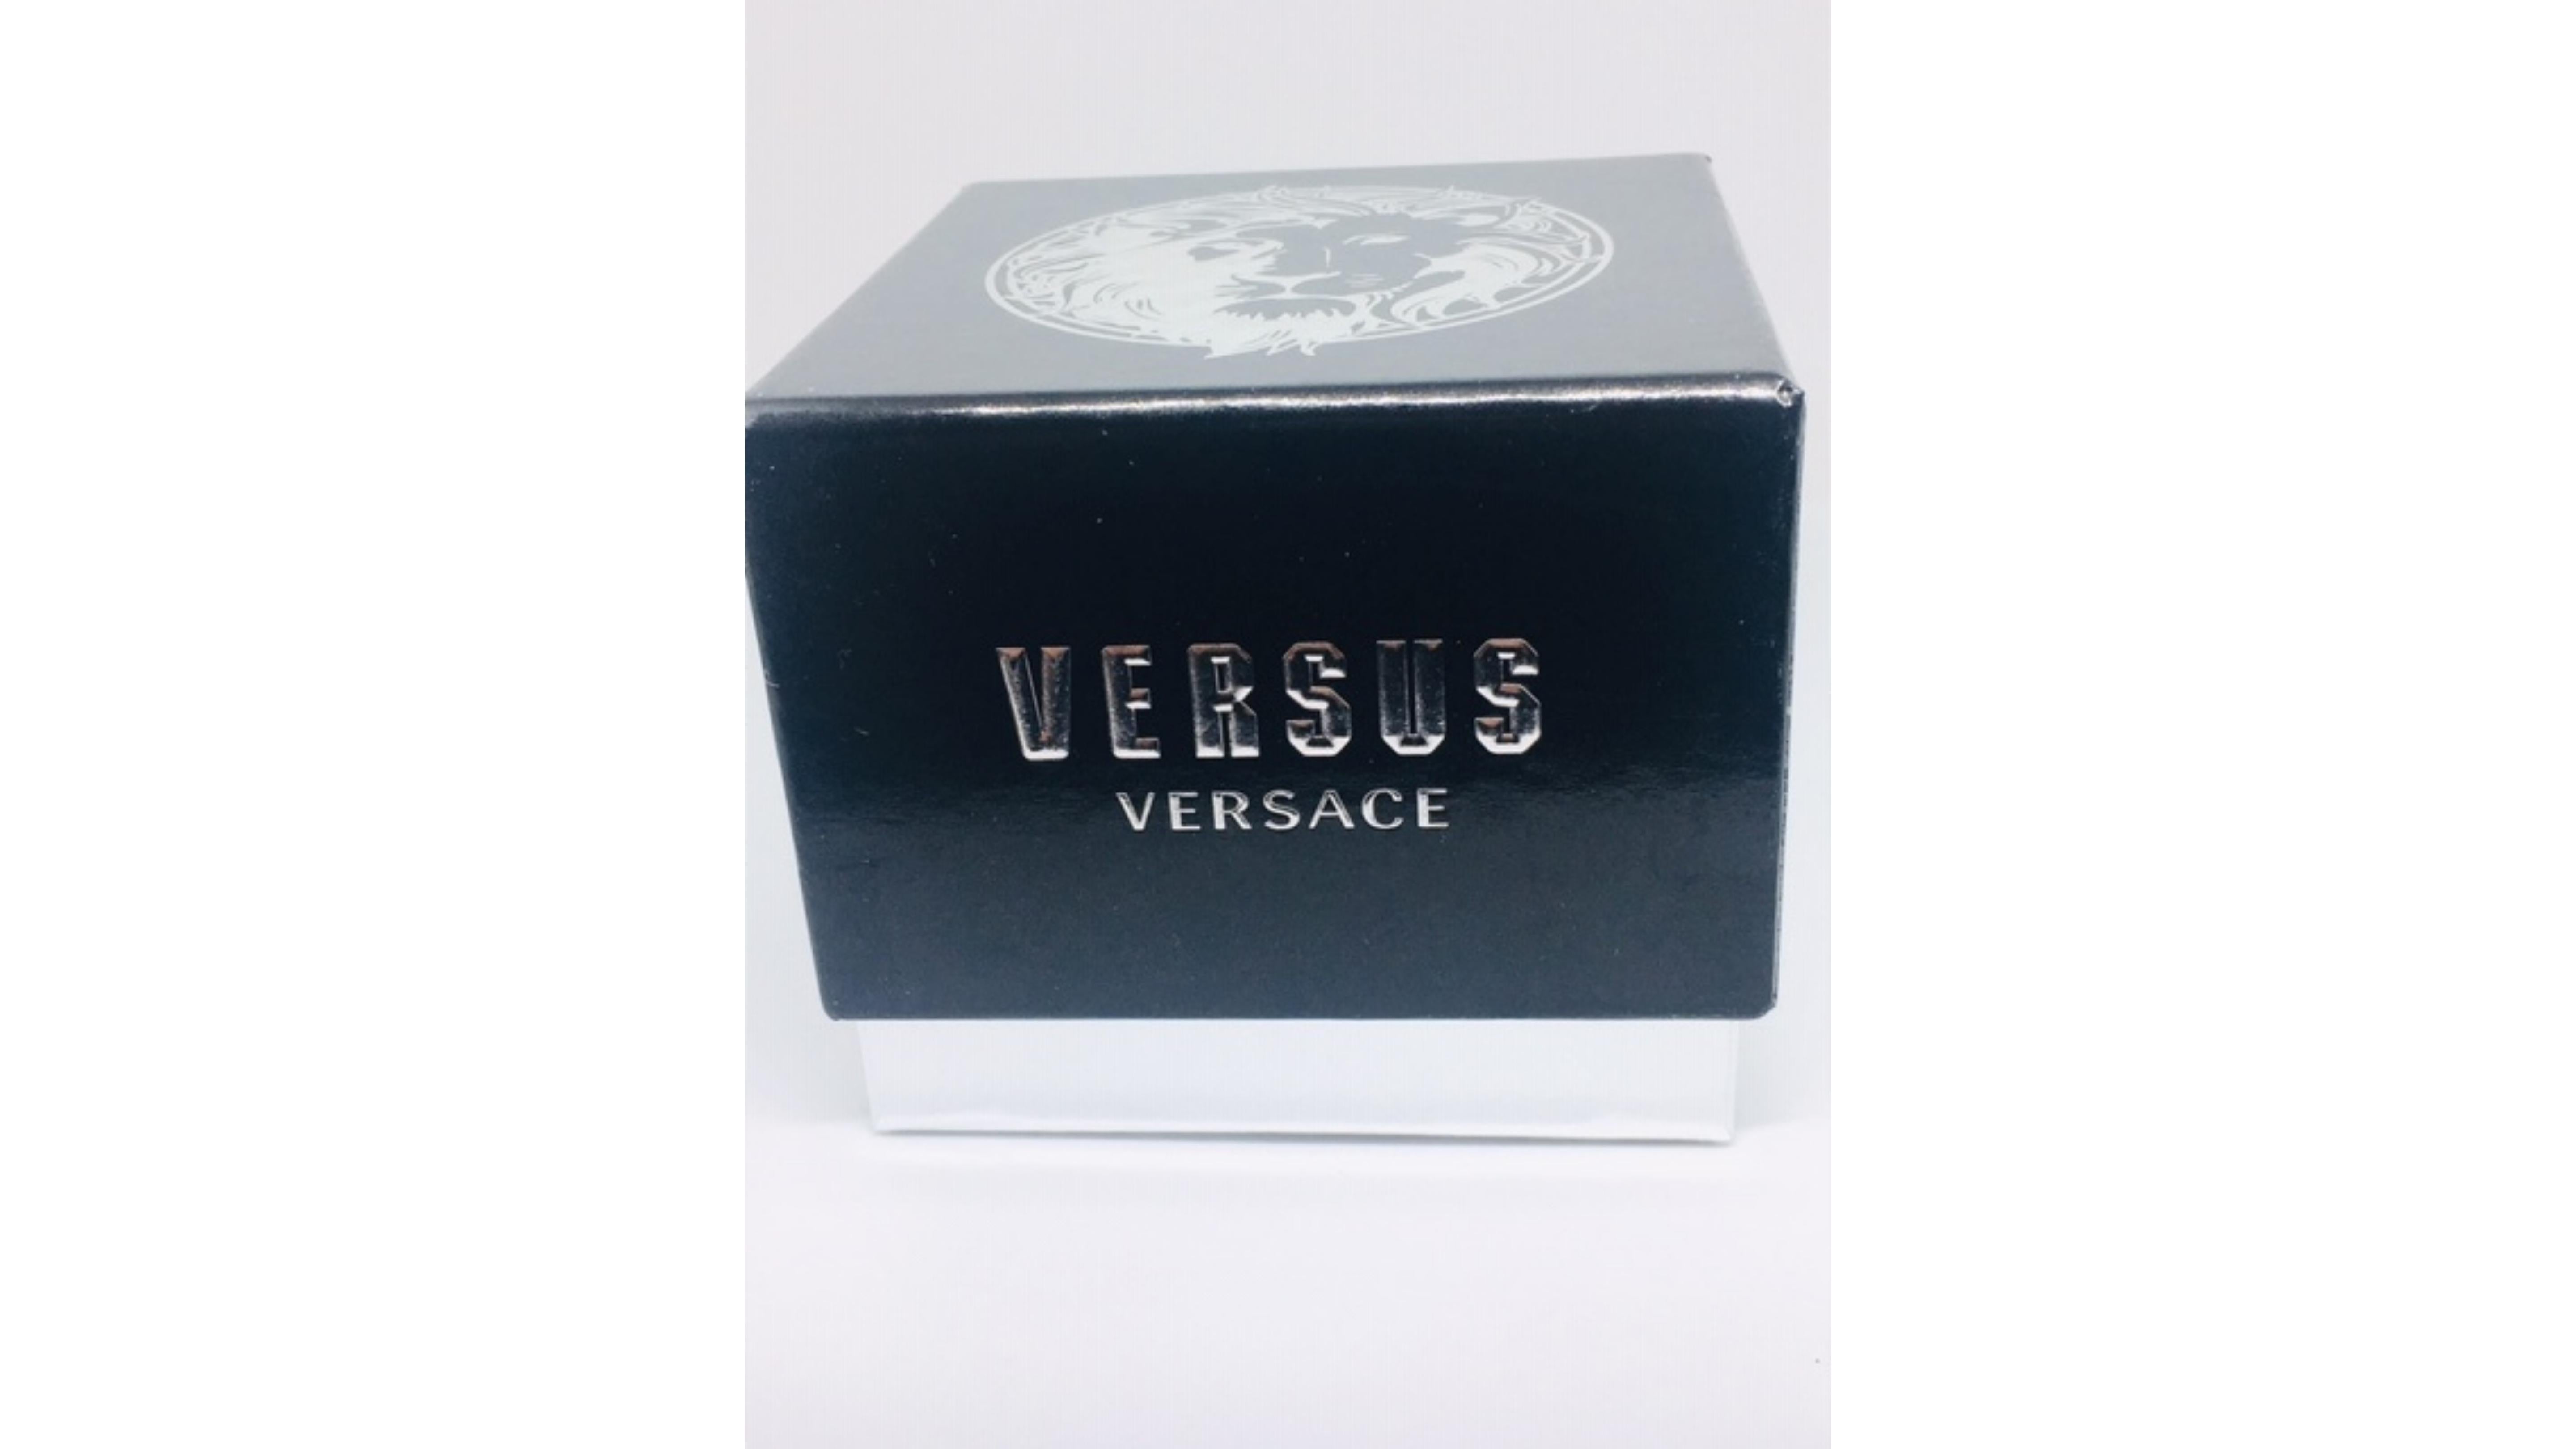 Mens Versace by Versus  Watch Yellow Gold with black dial.

Versace  By Versus Mens Watch   with silver features  on the dial ,  Very Contemporary and will also make a ideal gifts 


Quartz Chronograph movement
 Yellow Gold Bracelet
Deployment